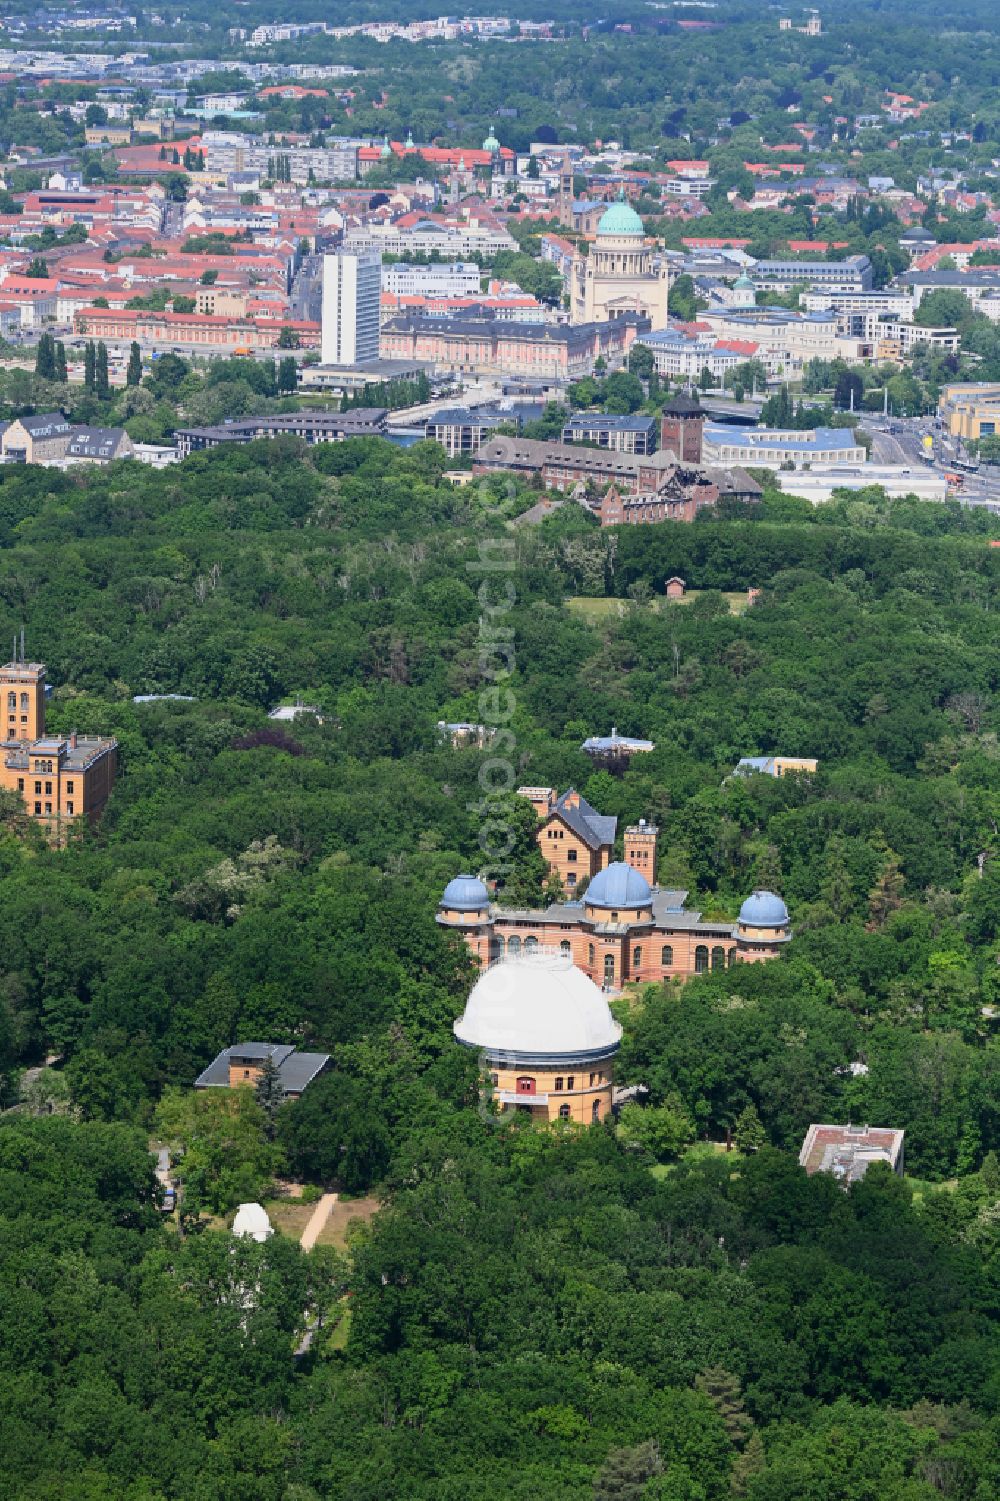 Aerial photograph Potsdam - Observatory and Planetariumskuppel- constructional building complex of the Institute of Potsdam-Institut fuer Klimafolgenforschung on Telegrafenberg in the district Potsdam Sued in Potsdam in the state Brandenburg